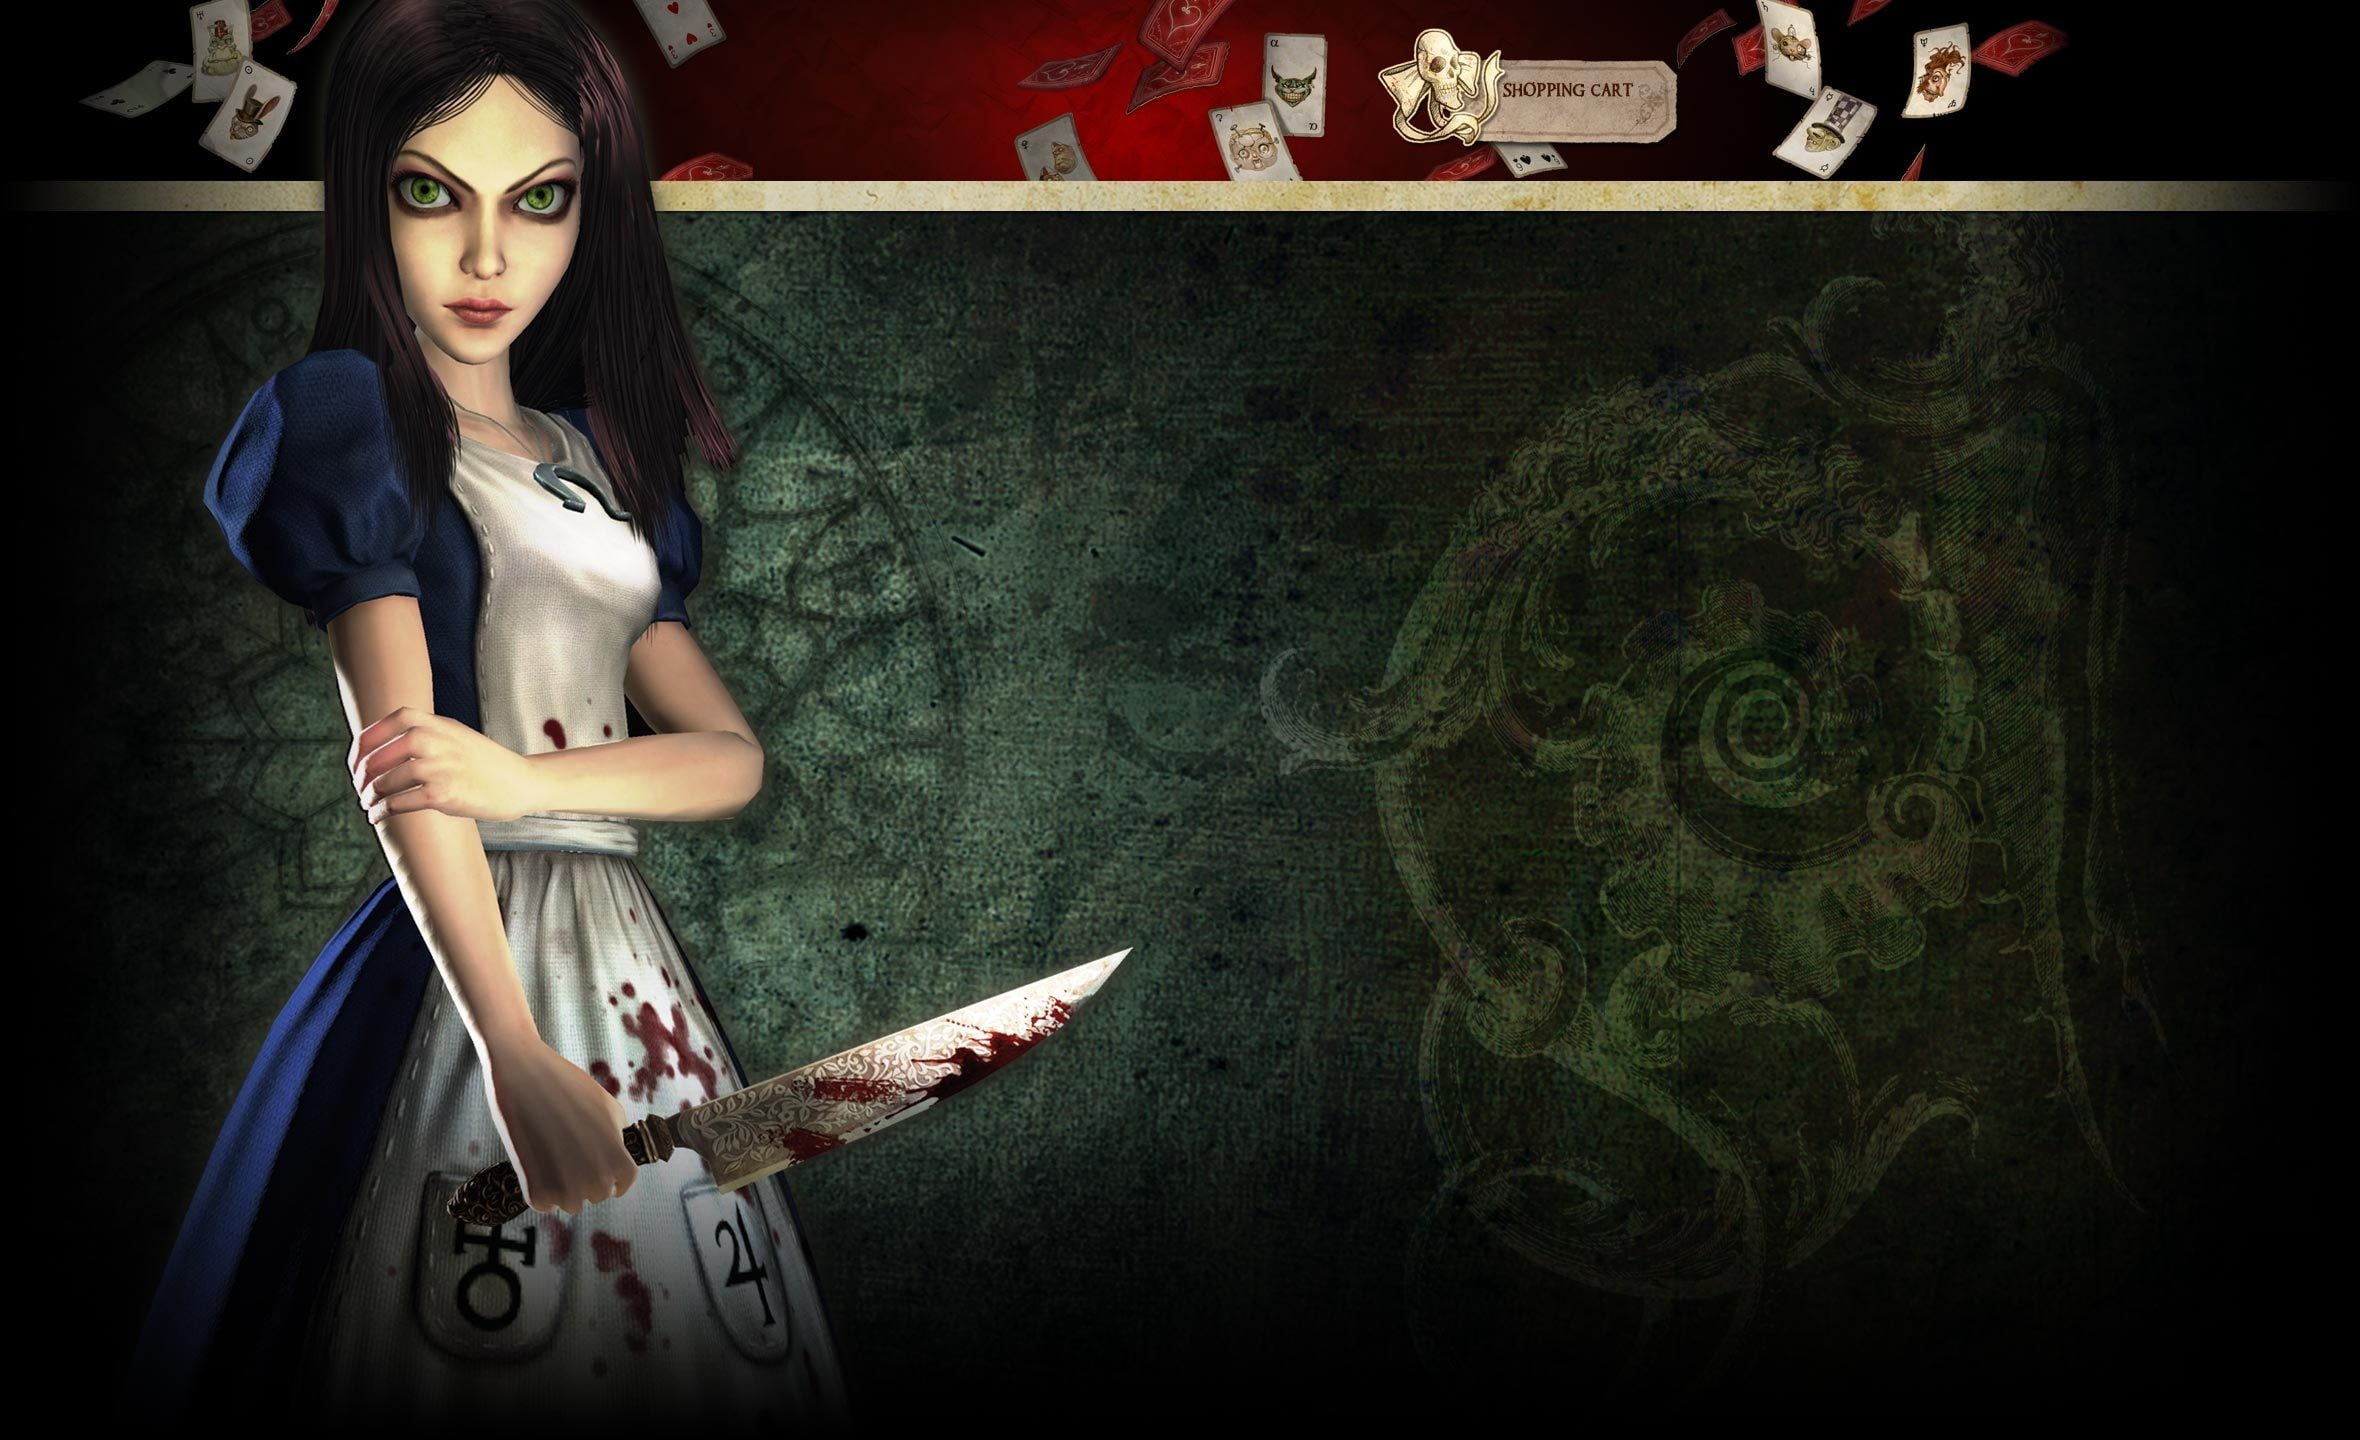 Free Download Hd Wallpaper Women S Black And White Floral Dress Video Games Alice Madness